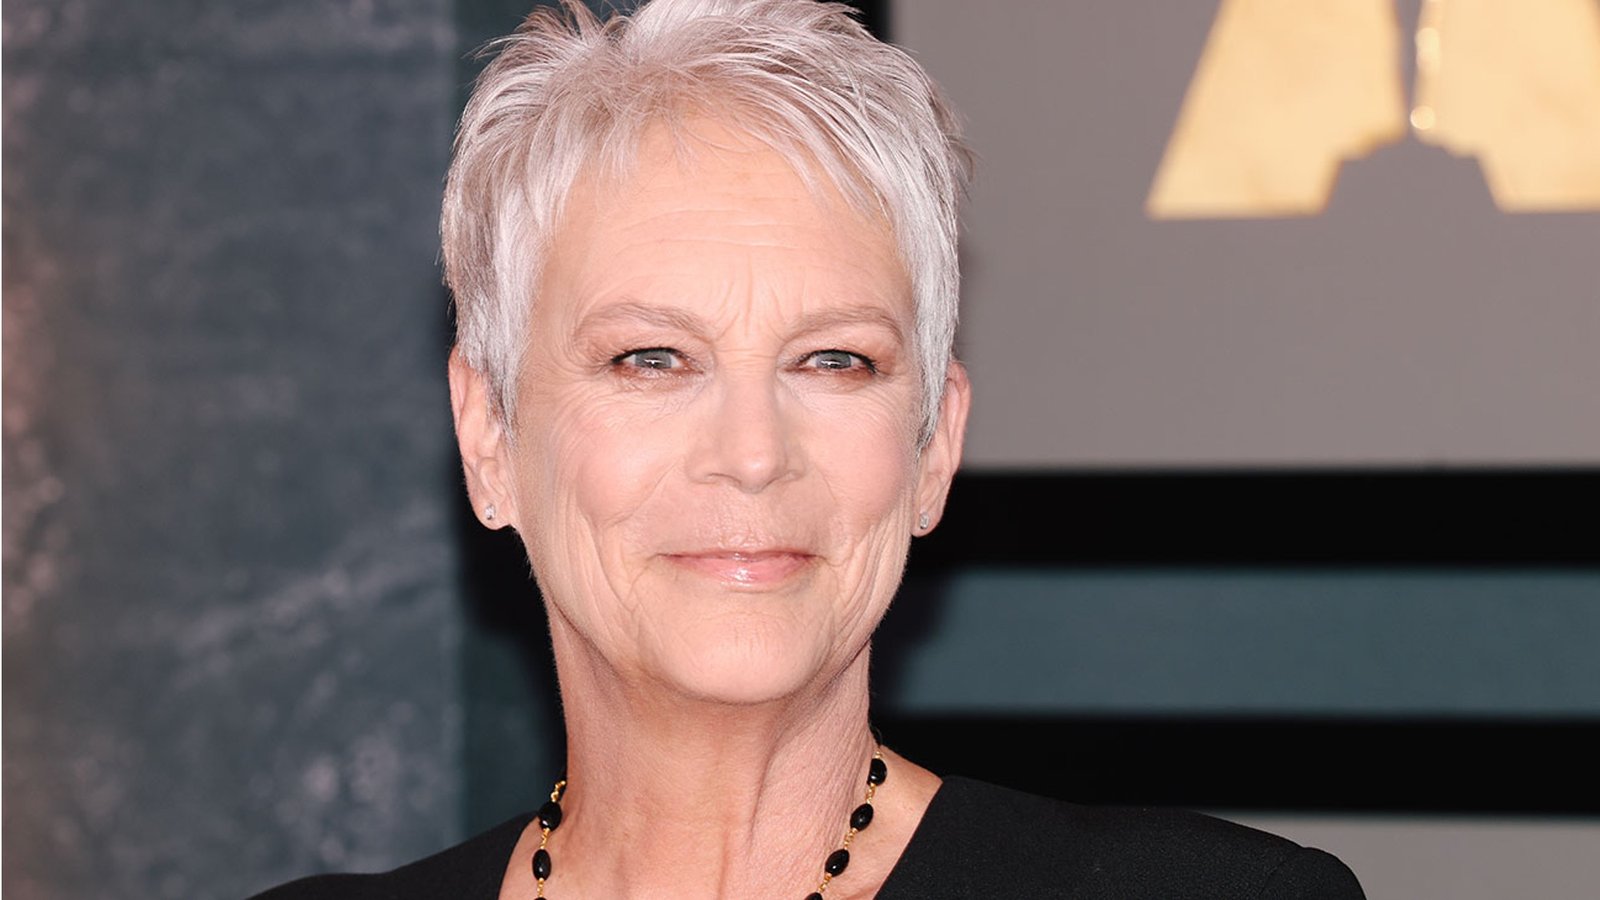 Jamie Lee Curtis: Age, Height, Net Worth, Spouse, Facts, & Controversies